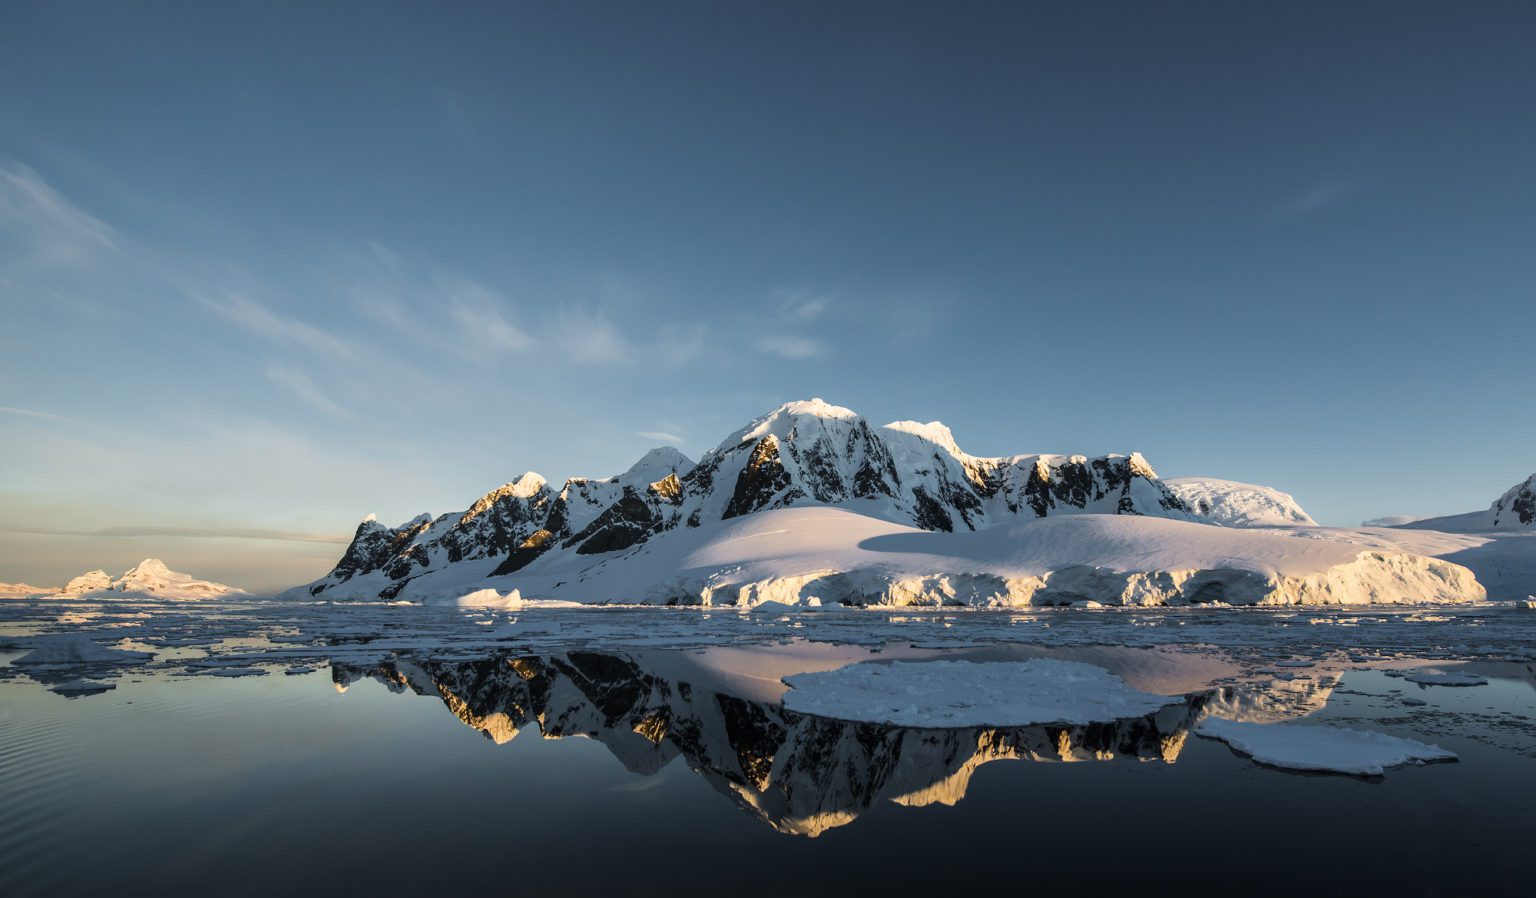 mirror reflection in the icy waters of snow capped mountains on the Antarctic Peninsula